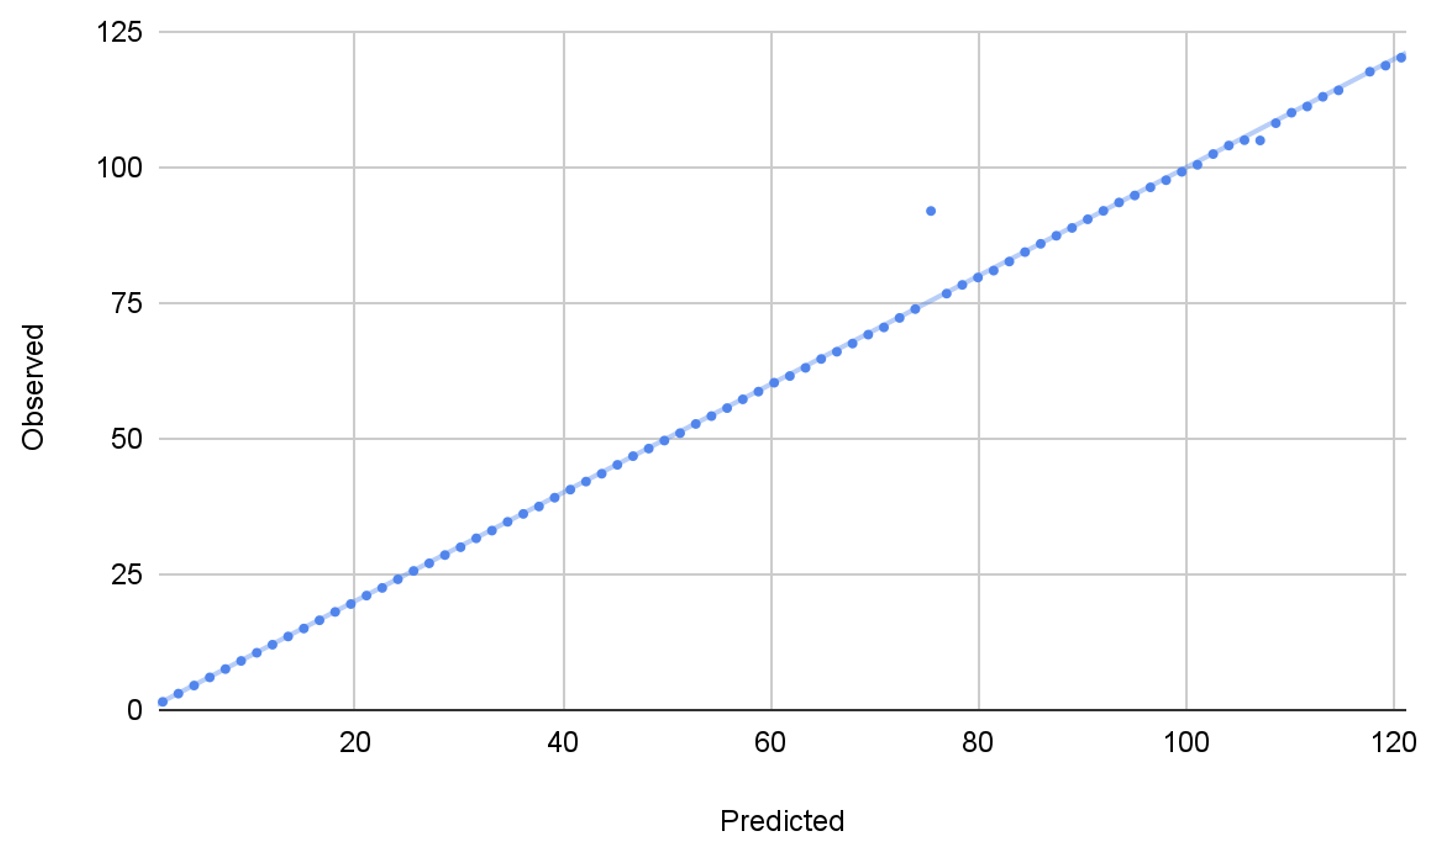 observed vs predicted values to quantify an outlier